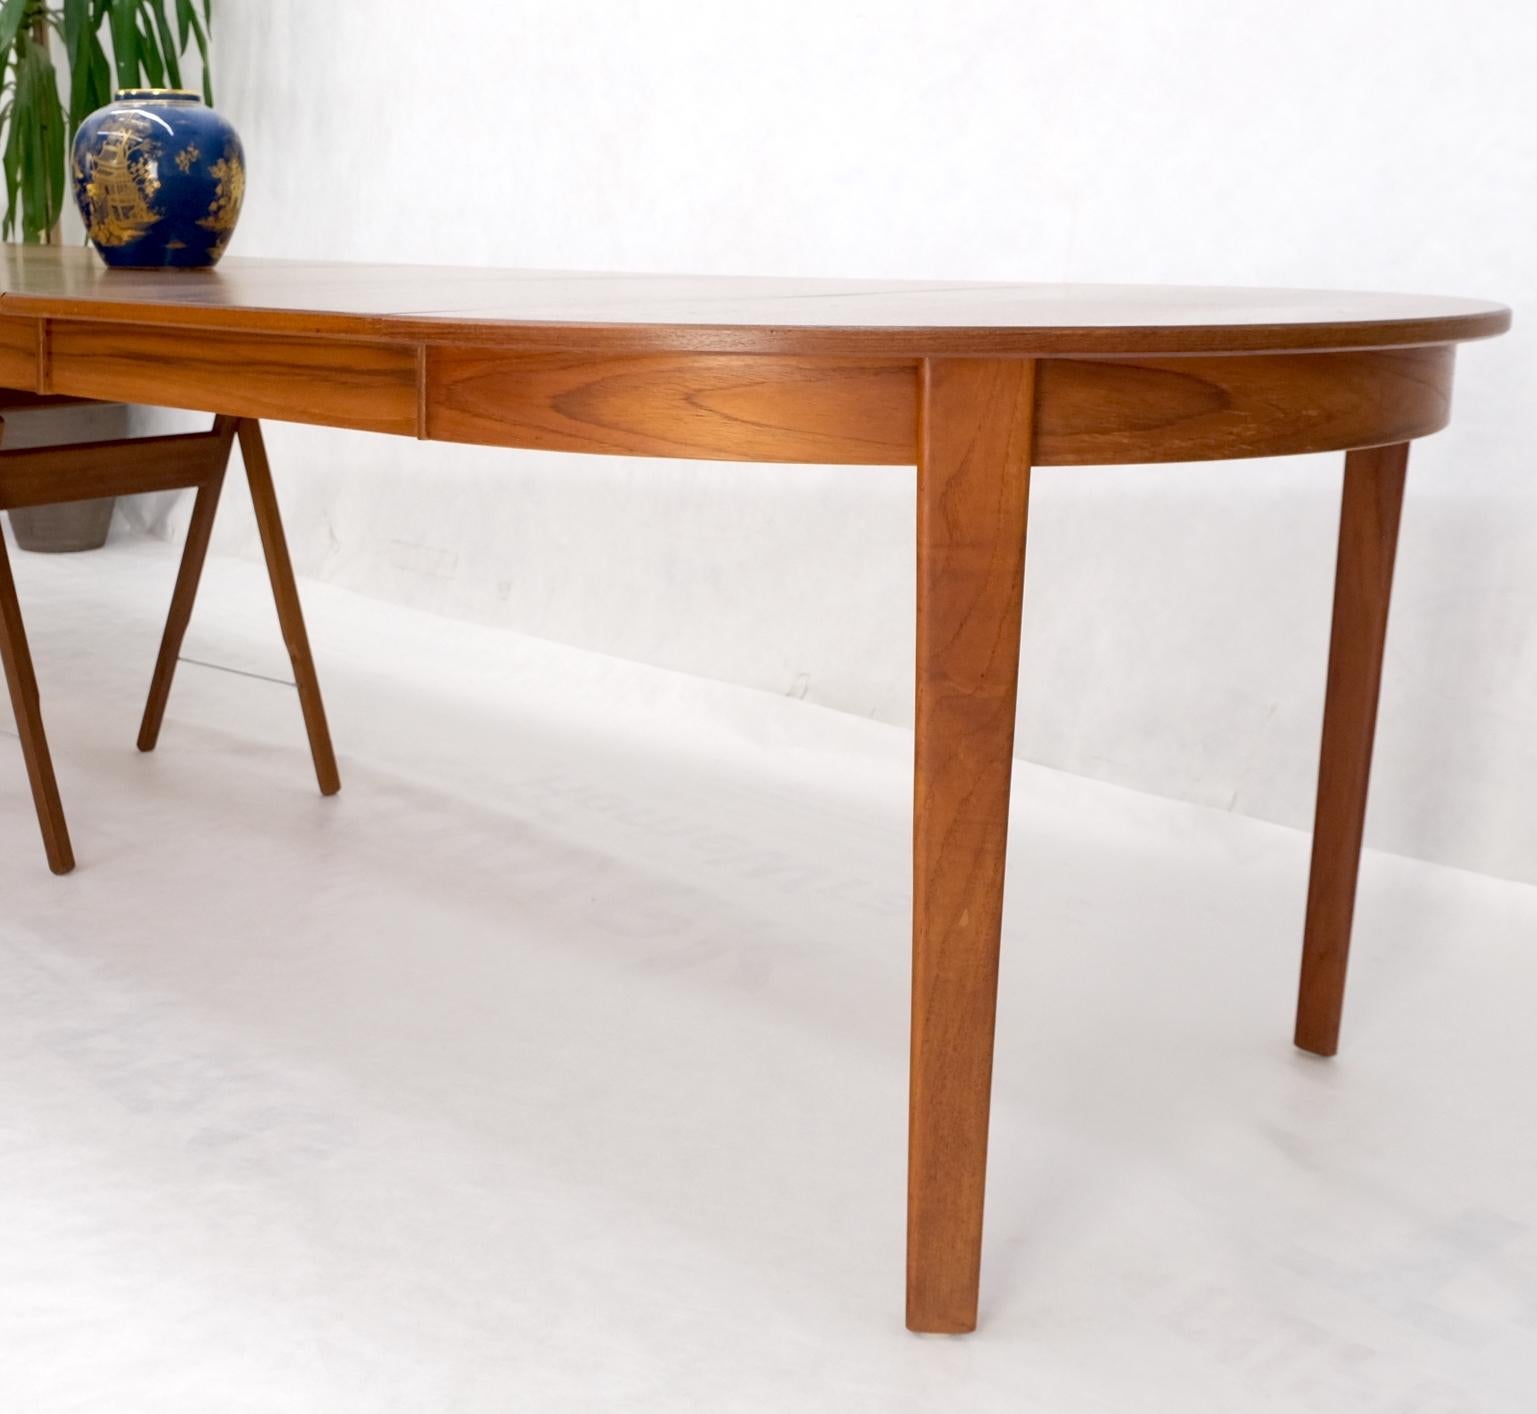 Lacquered Danish Teak Mid Century Modern Round Dining Banquet Conference Table 4 Leaf MINT For Sale